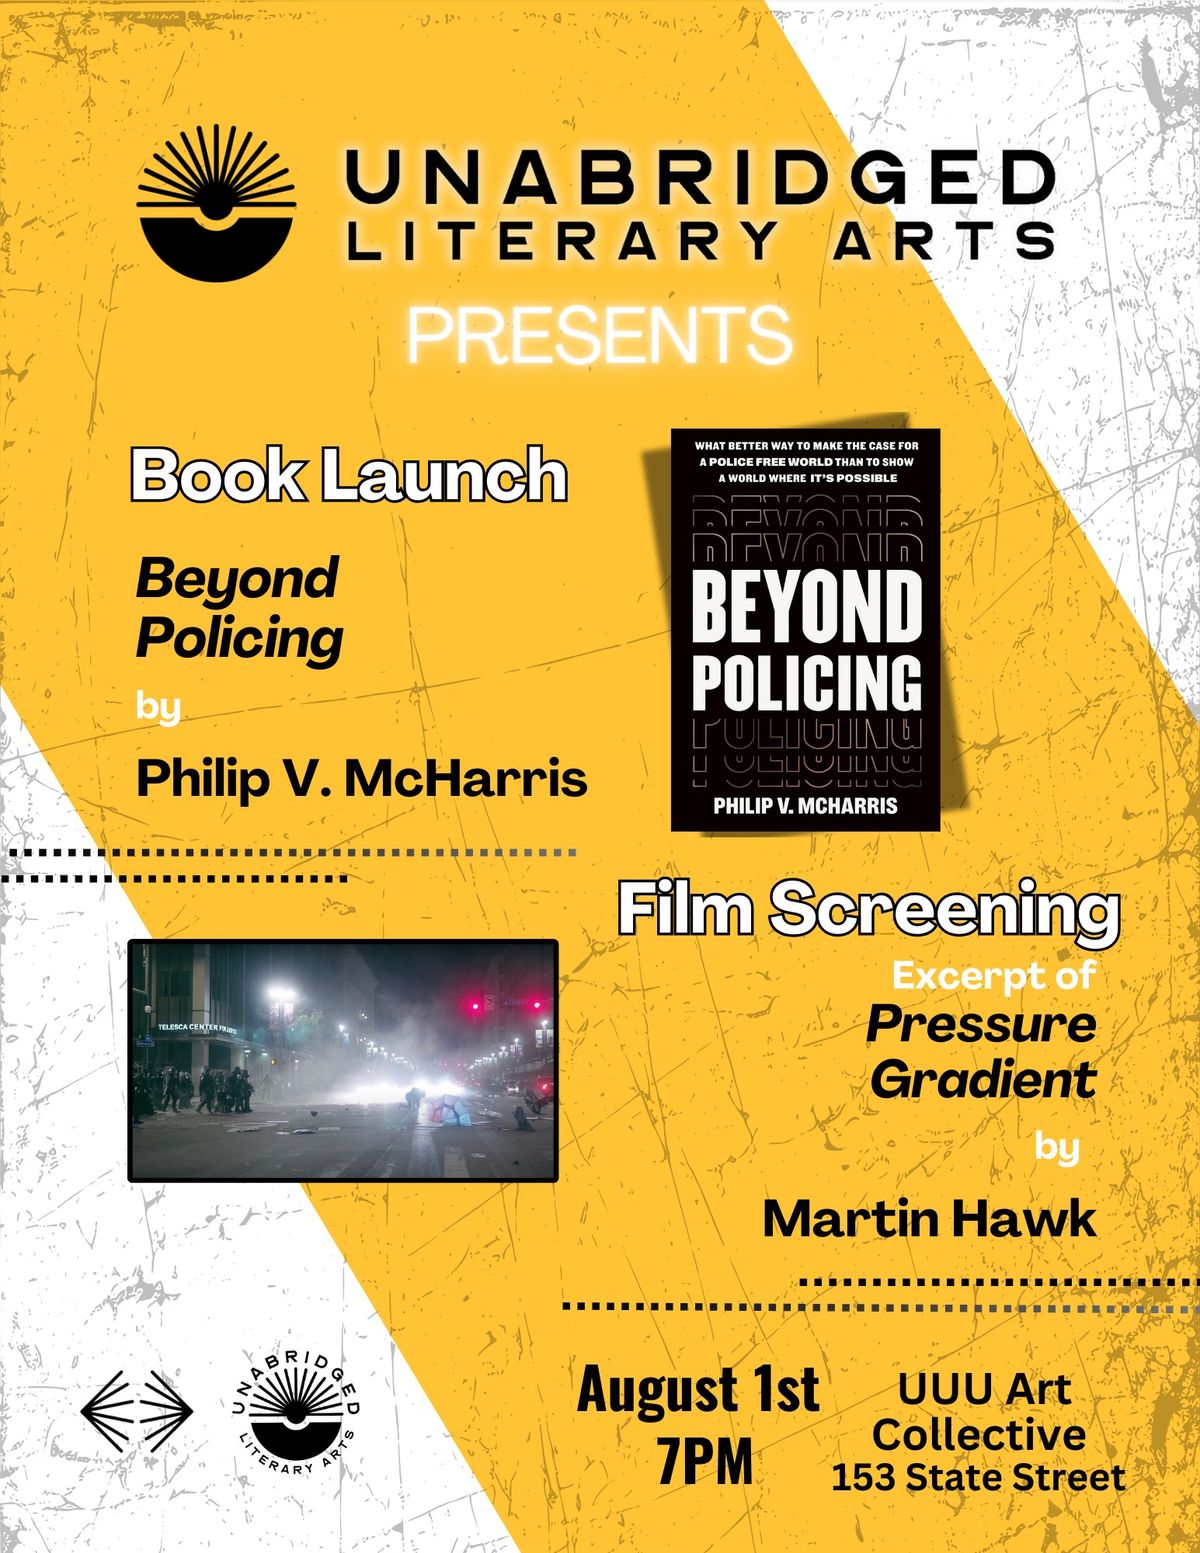 Book Launch and Film Screening -- "Beyond Policing" and "Pressure Gradient"